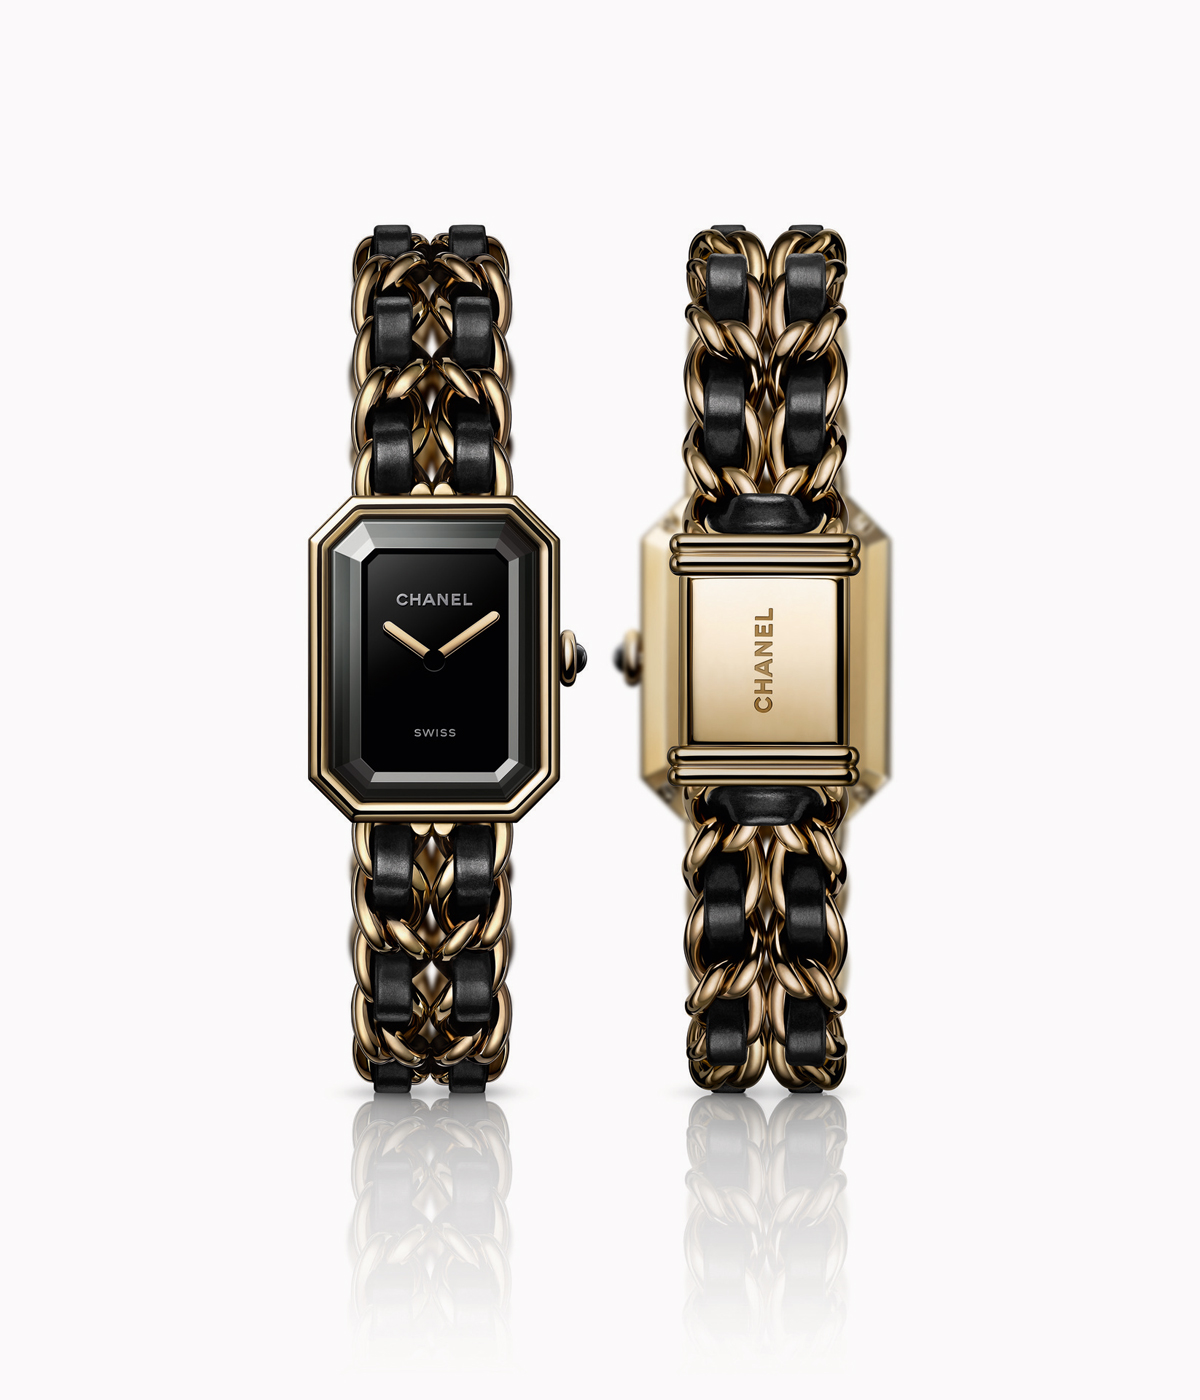 New Chanel Première watch draws on the house’s design codes | Wallpaper